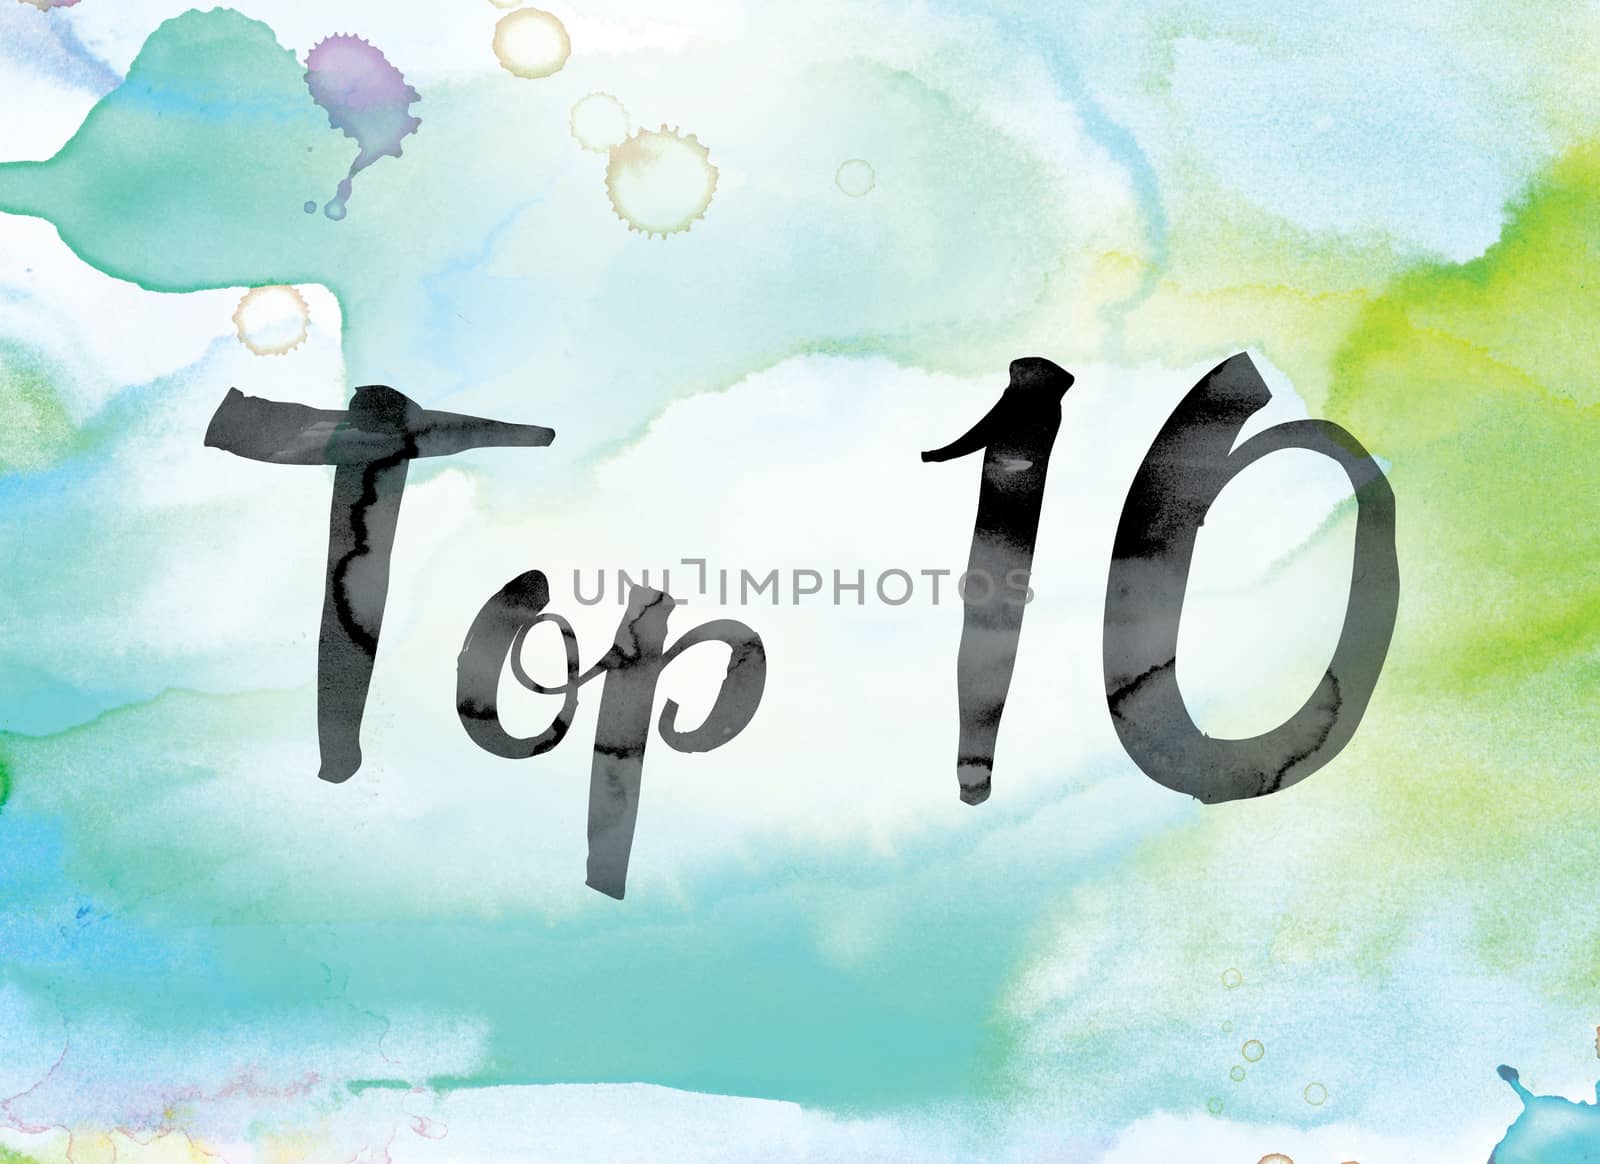 The word "Top 10" painted in black ink over a colorful watercolor washed background concept and theme.